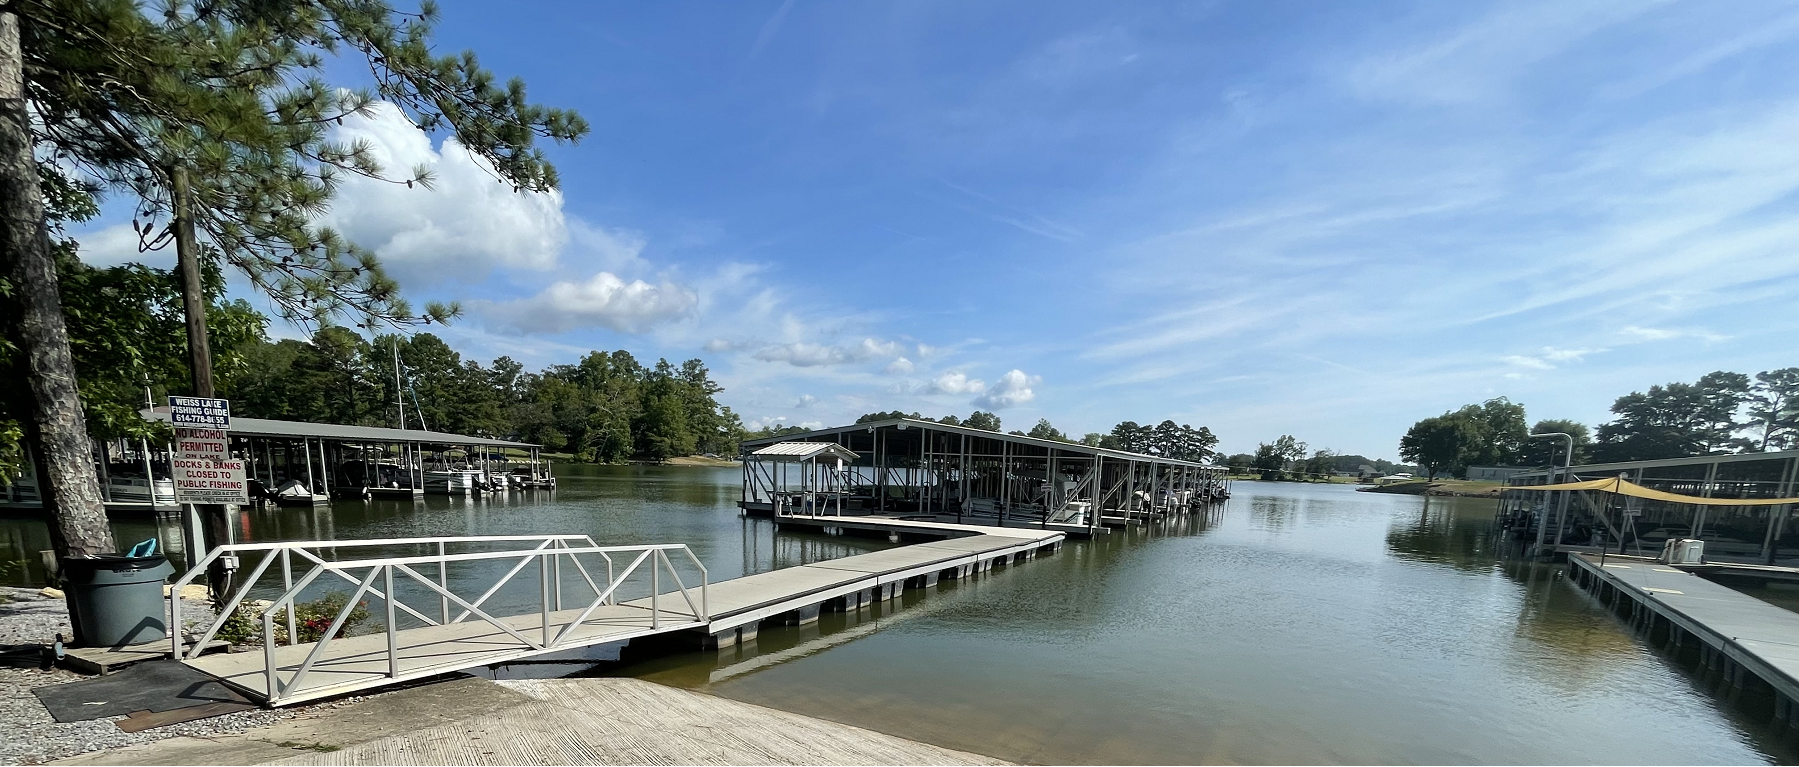 Weiss Lake Marina and Bait & Tackle Shop in Centre, AL at Bay